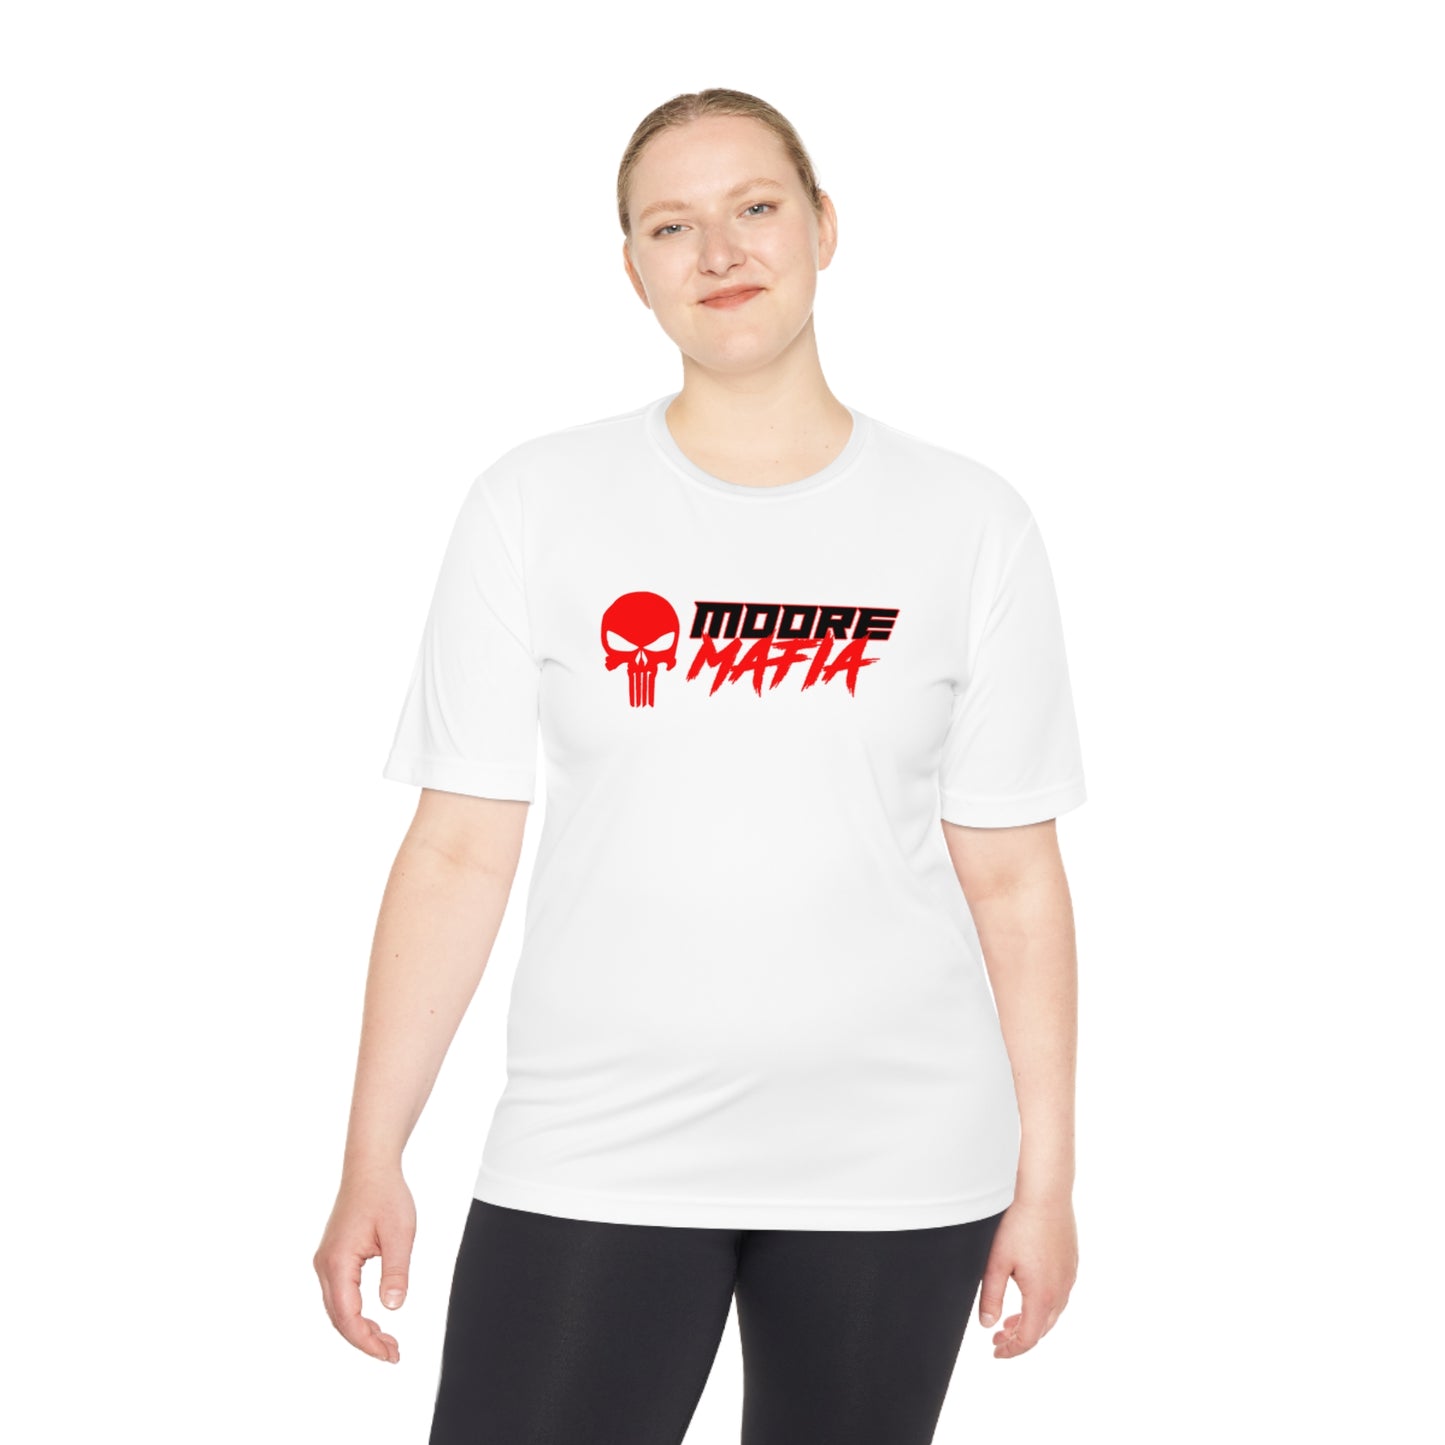 Burnouts And Boobies Unisex Moisture Wicking Tee